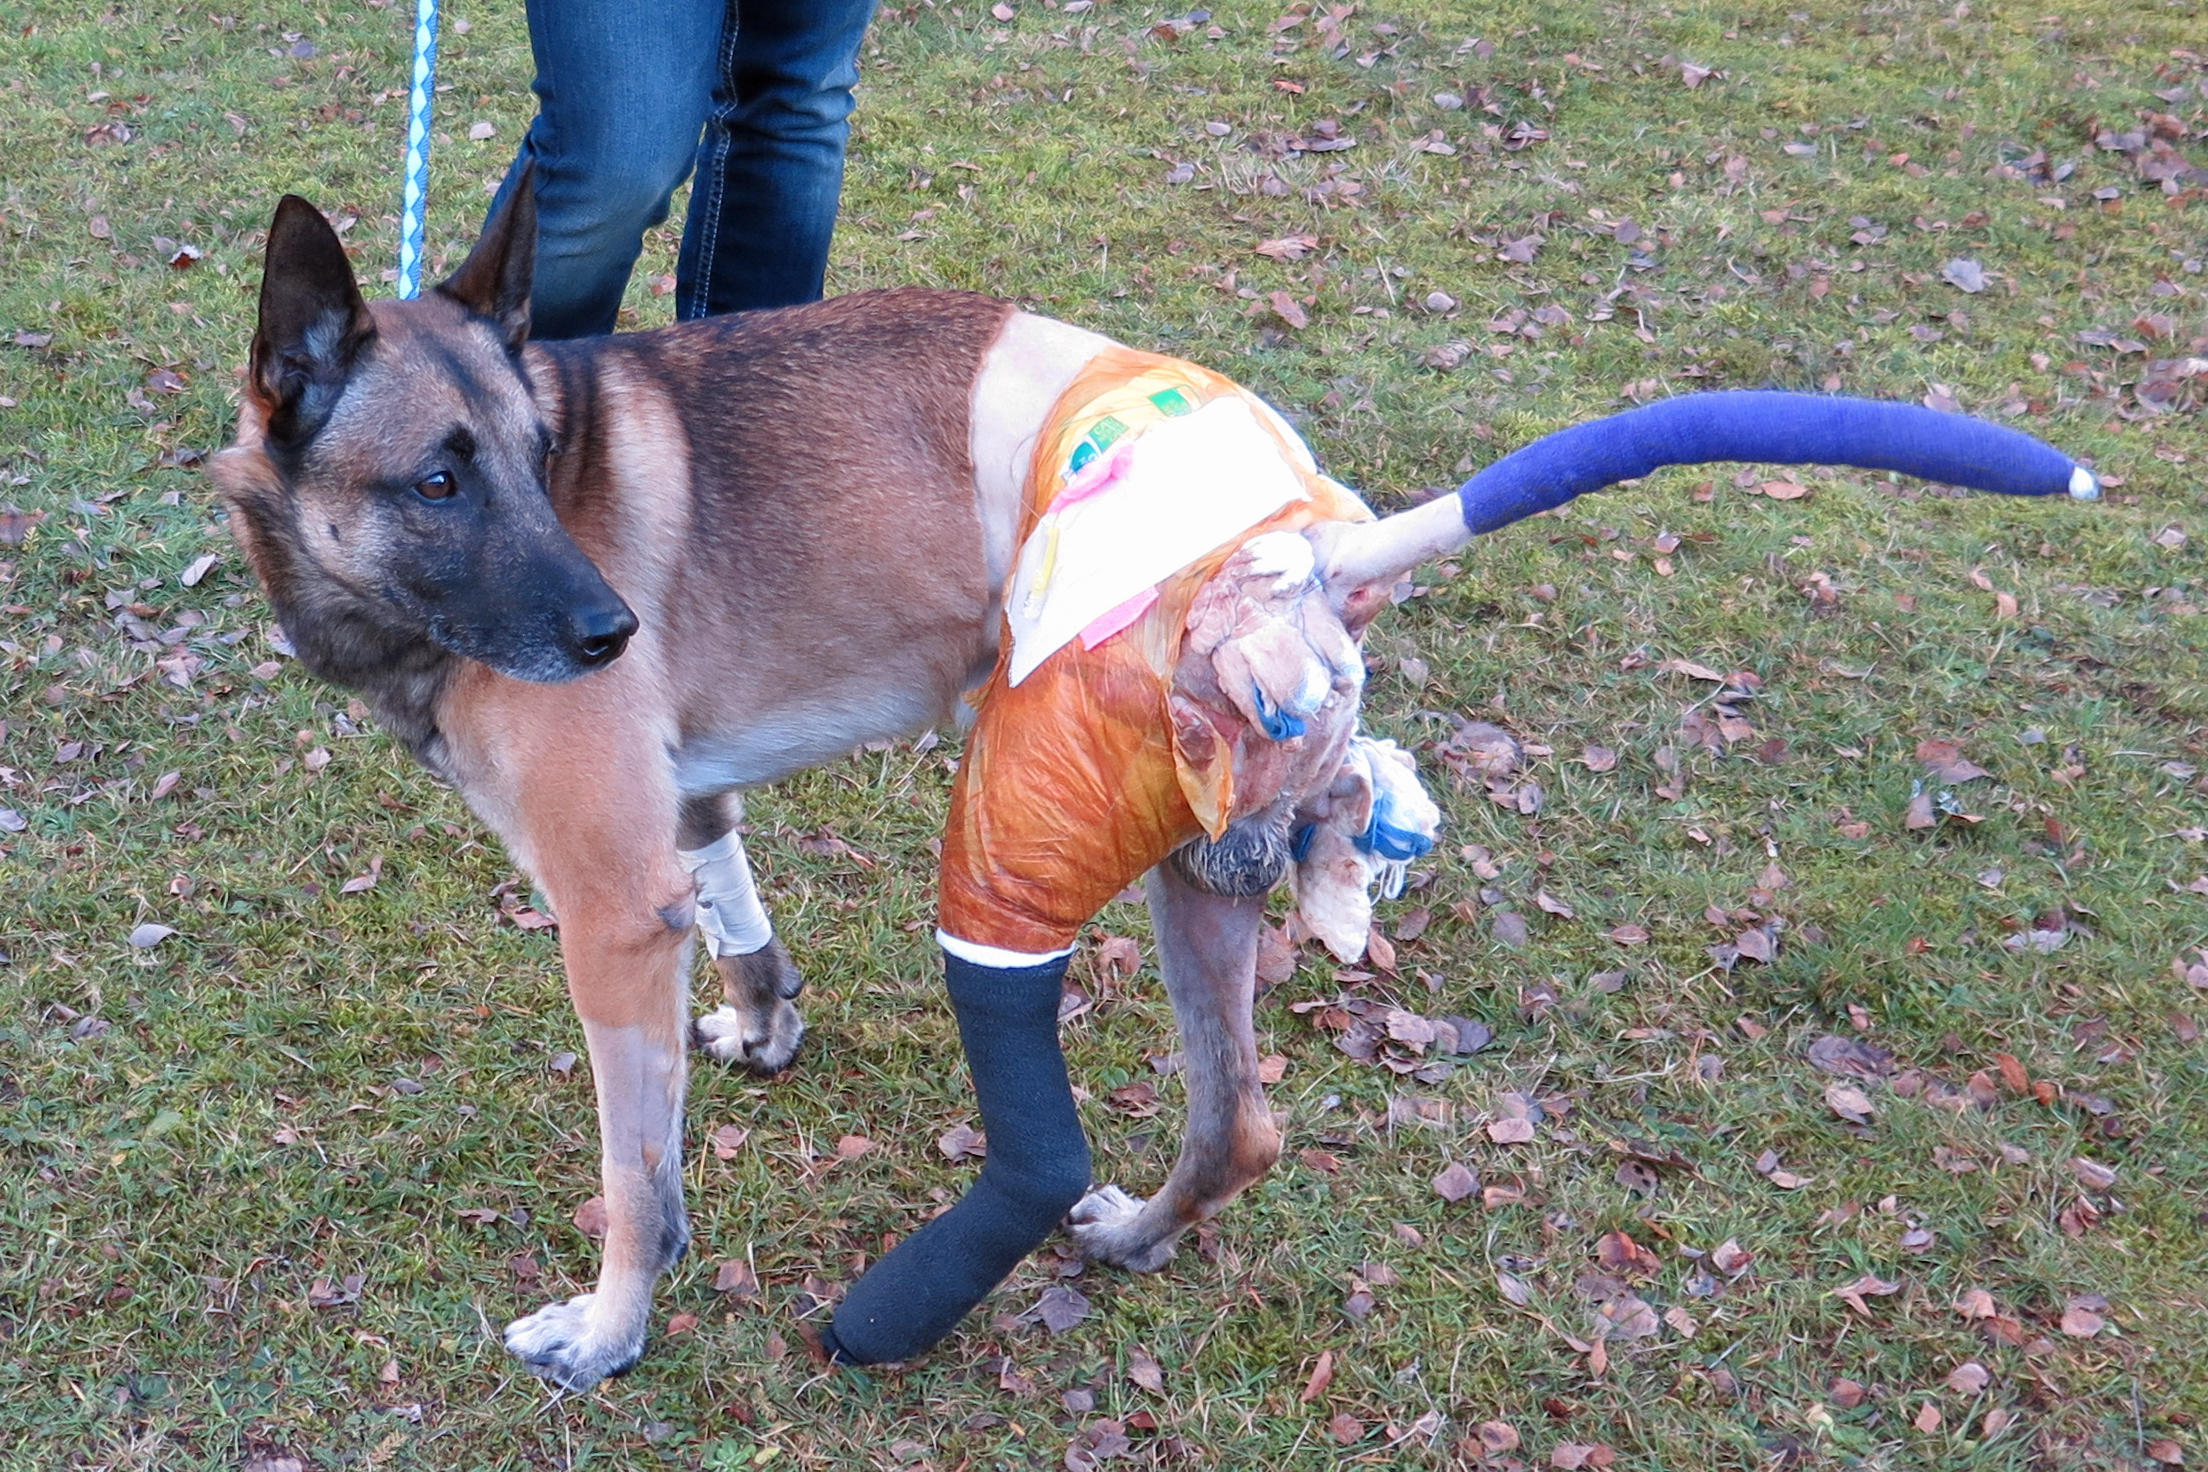 Dog Center Europe treats canine casualty | Article | The United ...